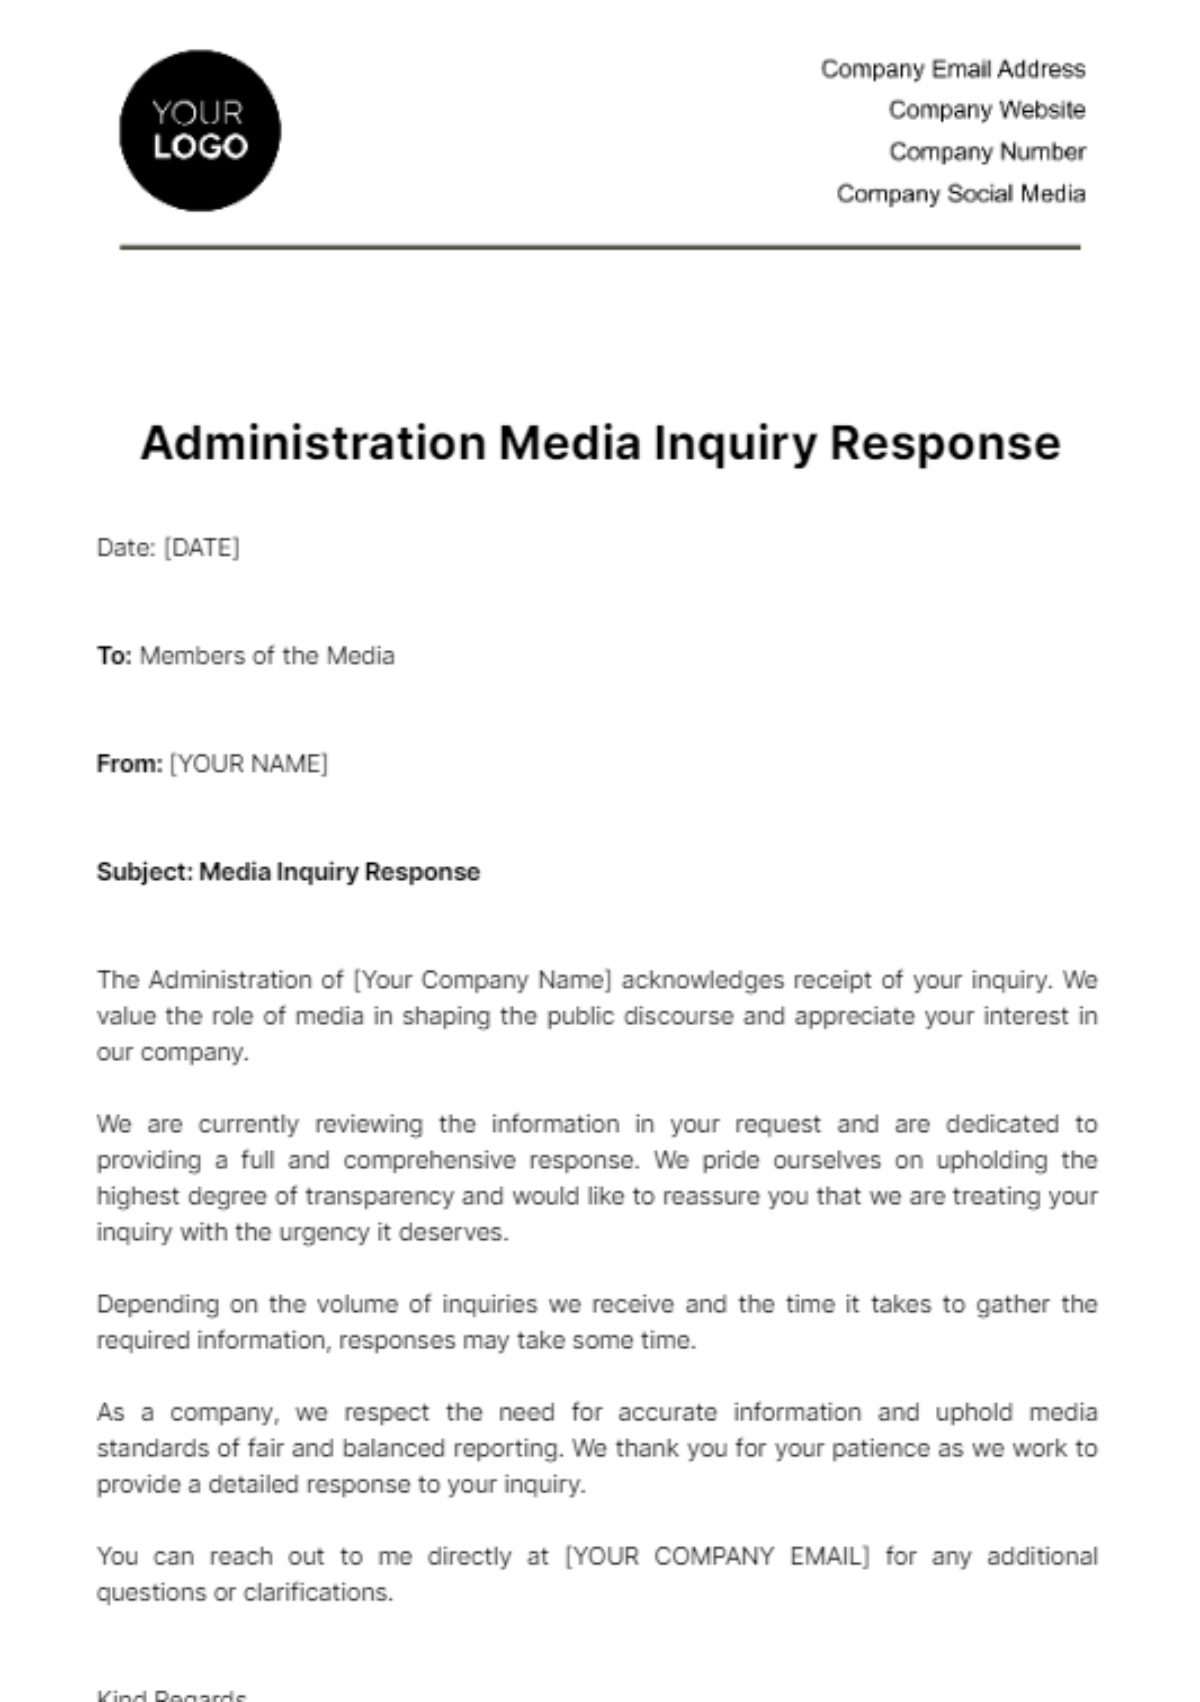 Free Administration Media Inquiry Response Template